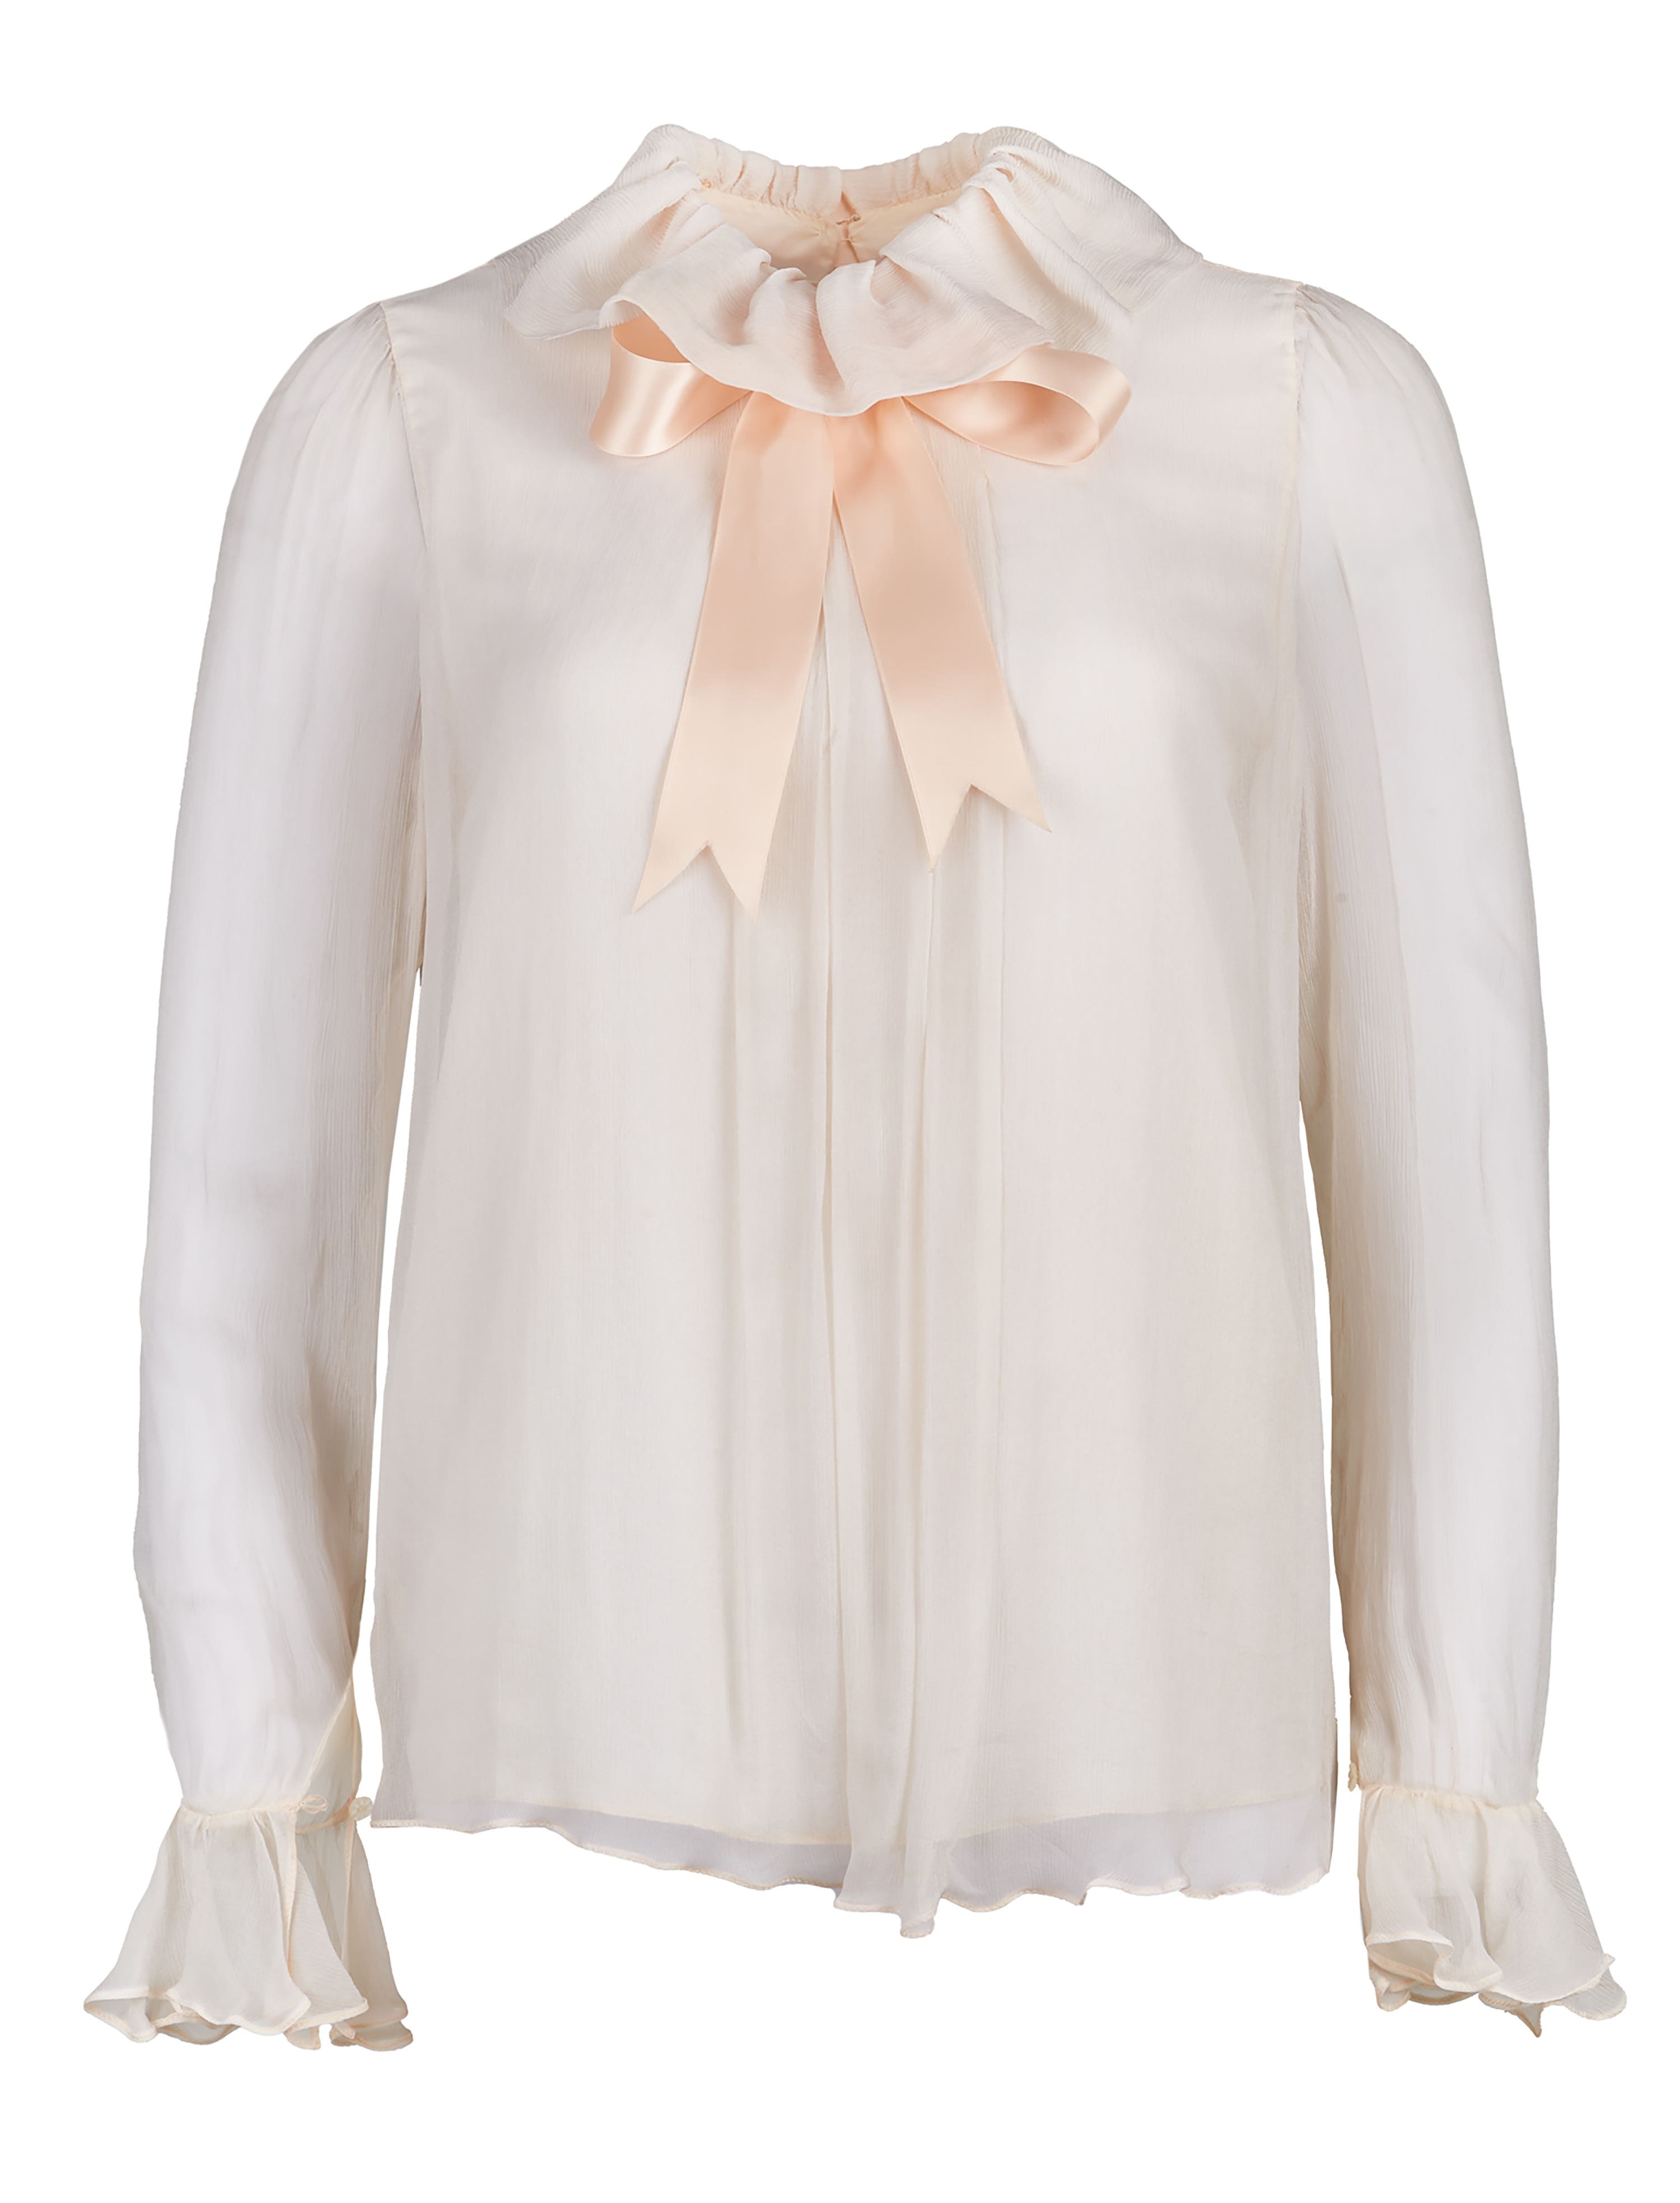 A blouse worn by Diana for her engagement portrait in 1981 was sold for four times its estimate (Julien’s Auctions/PA).